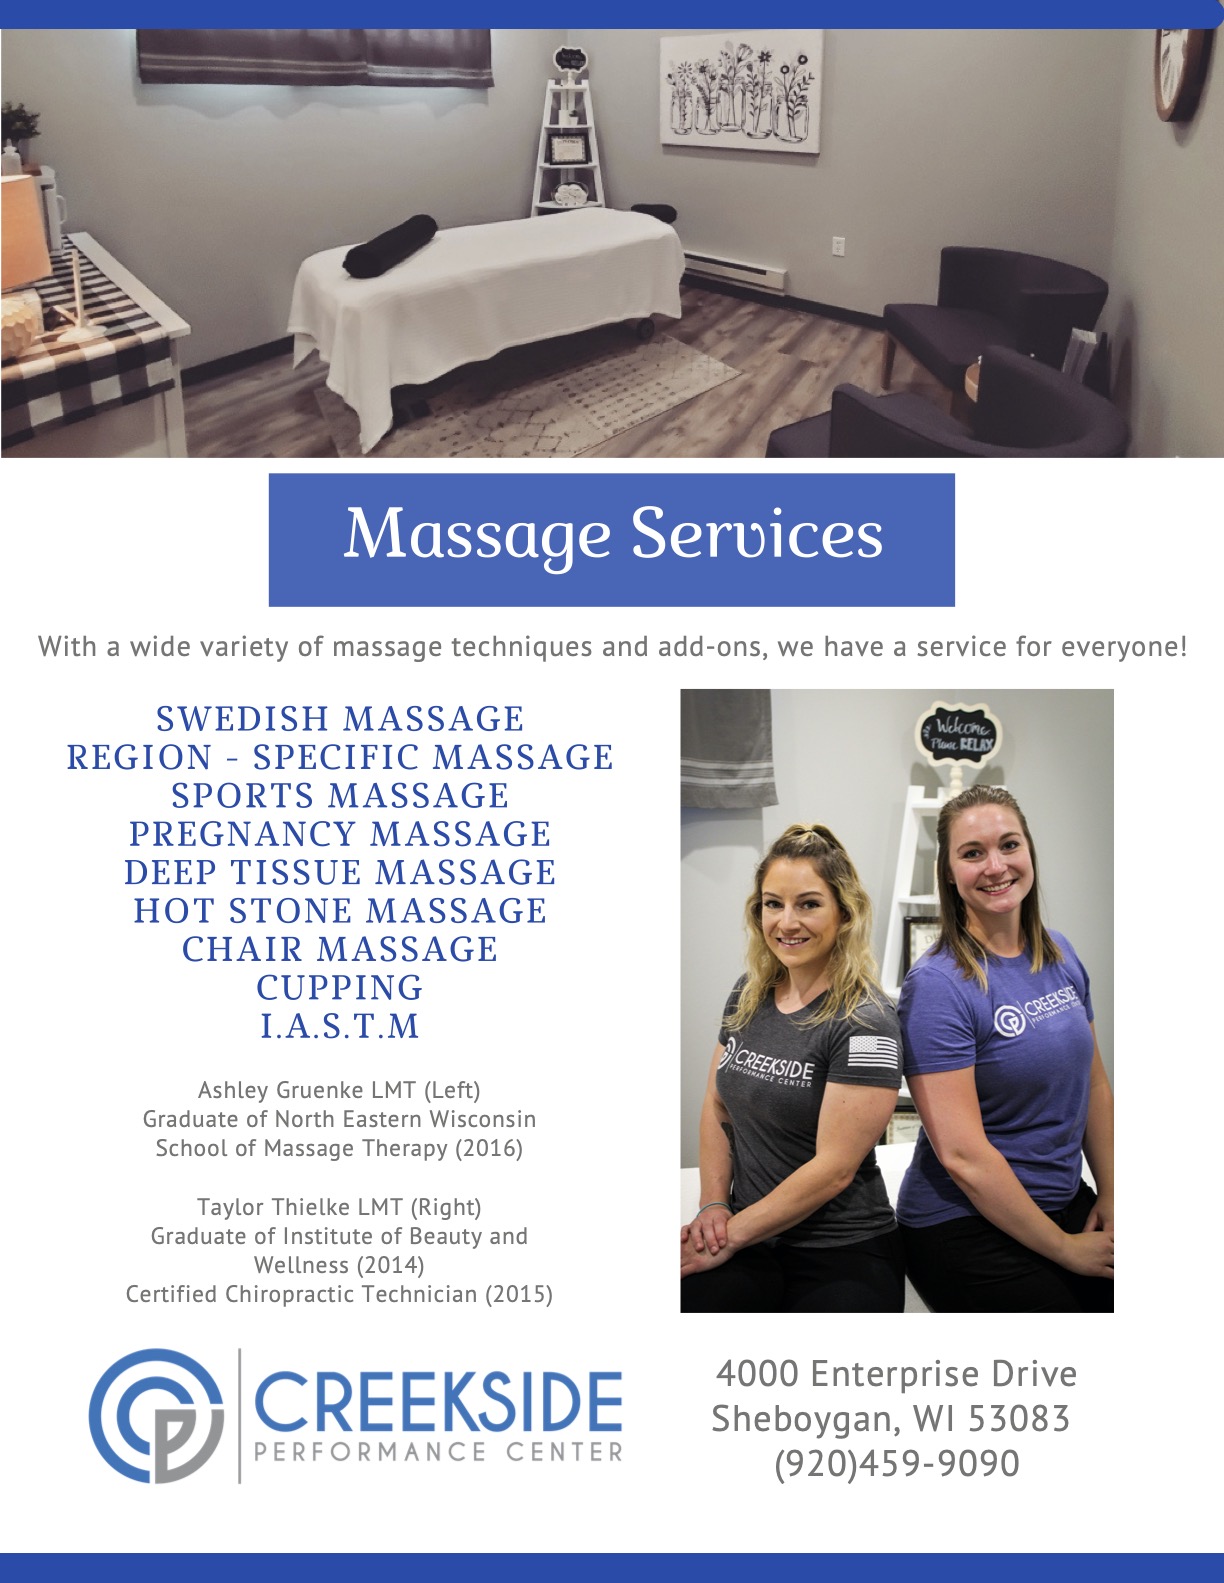 Creekside Massage Therapy